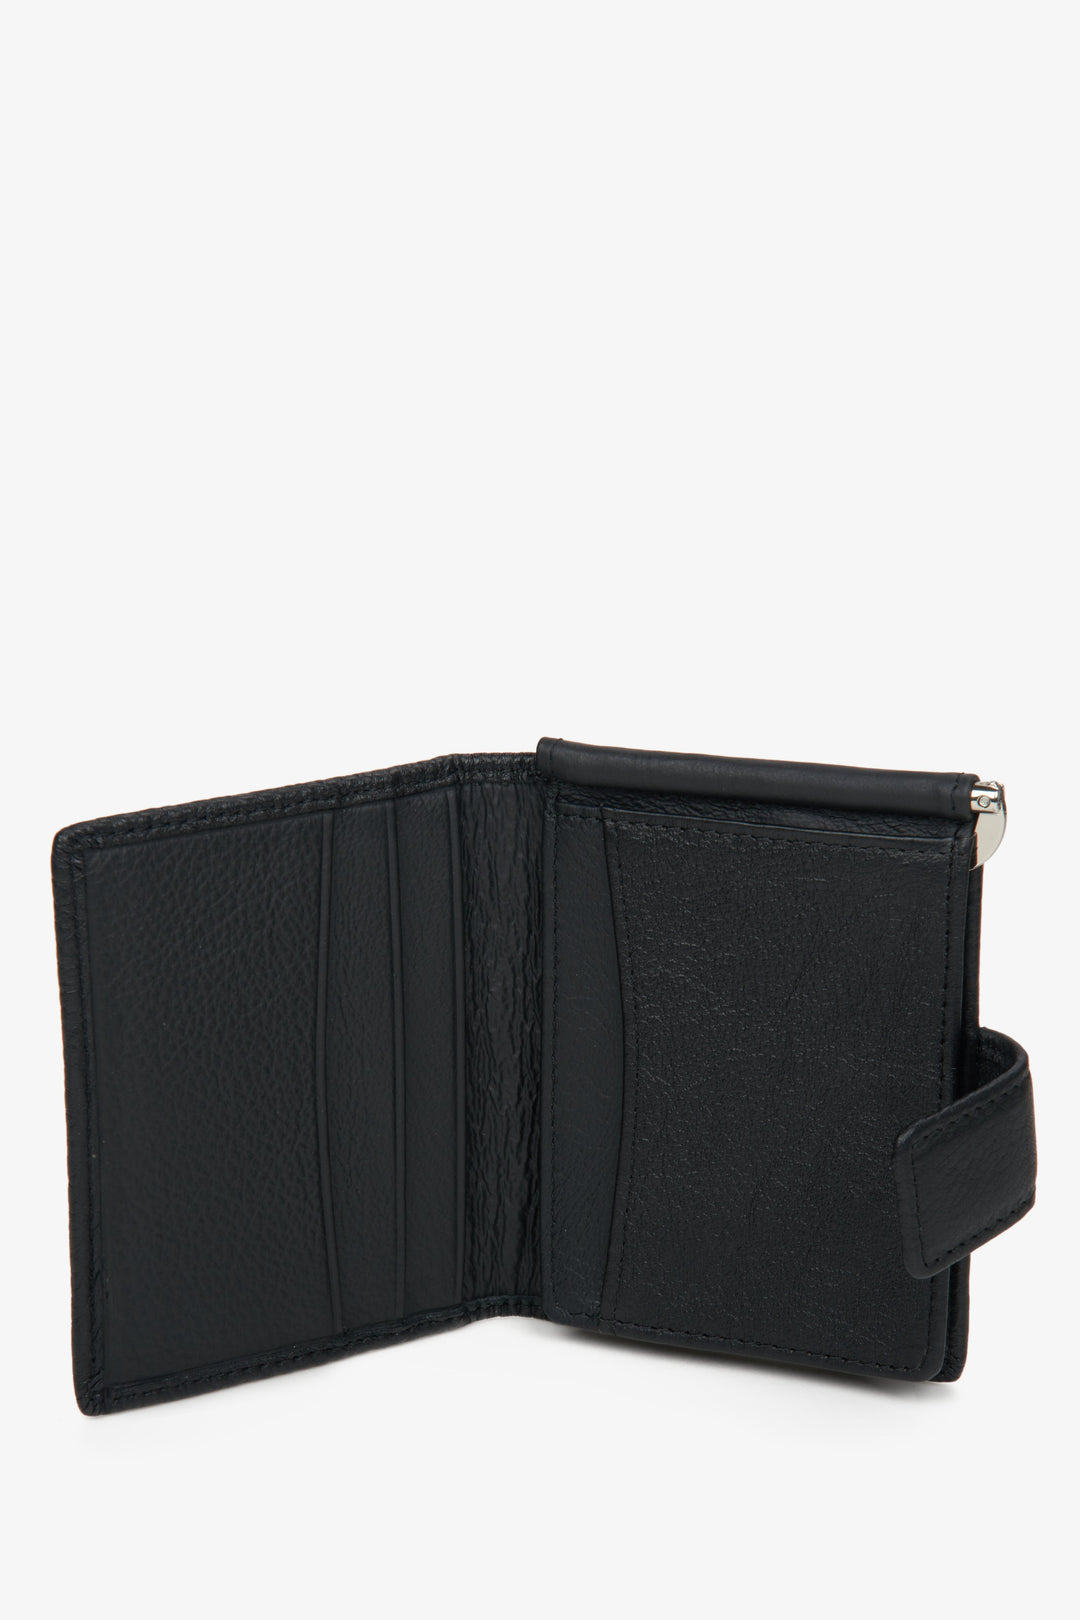 The interior of the black leather men's wallet by Estro.